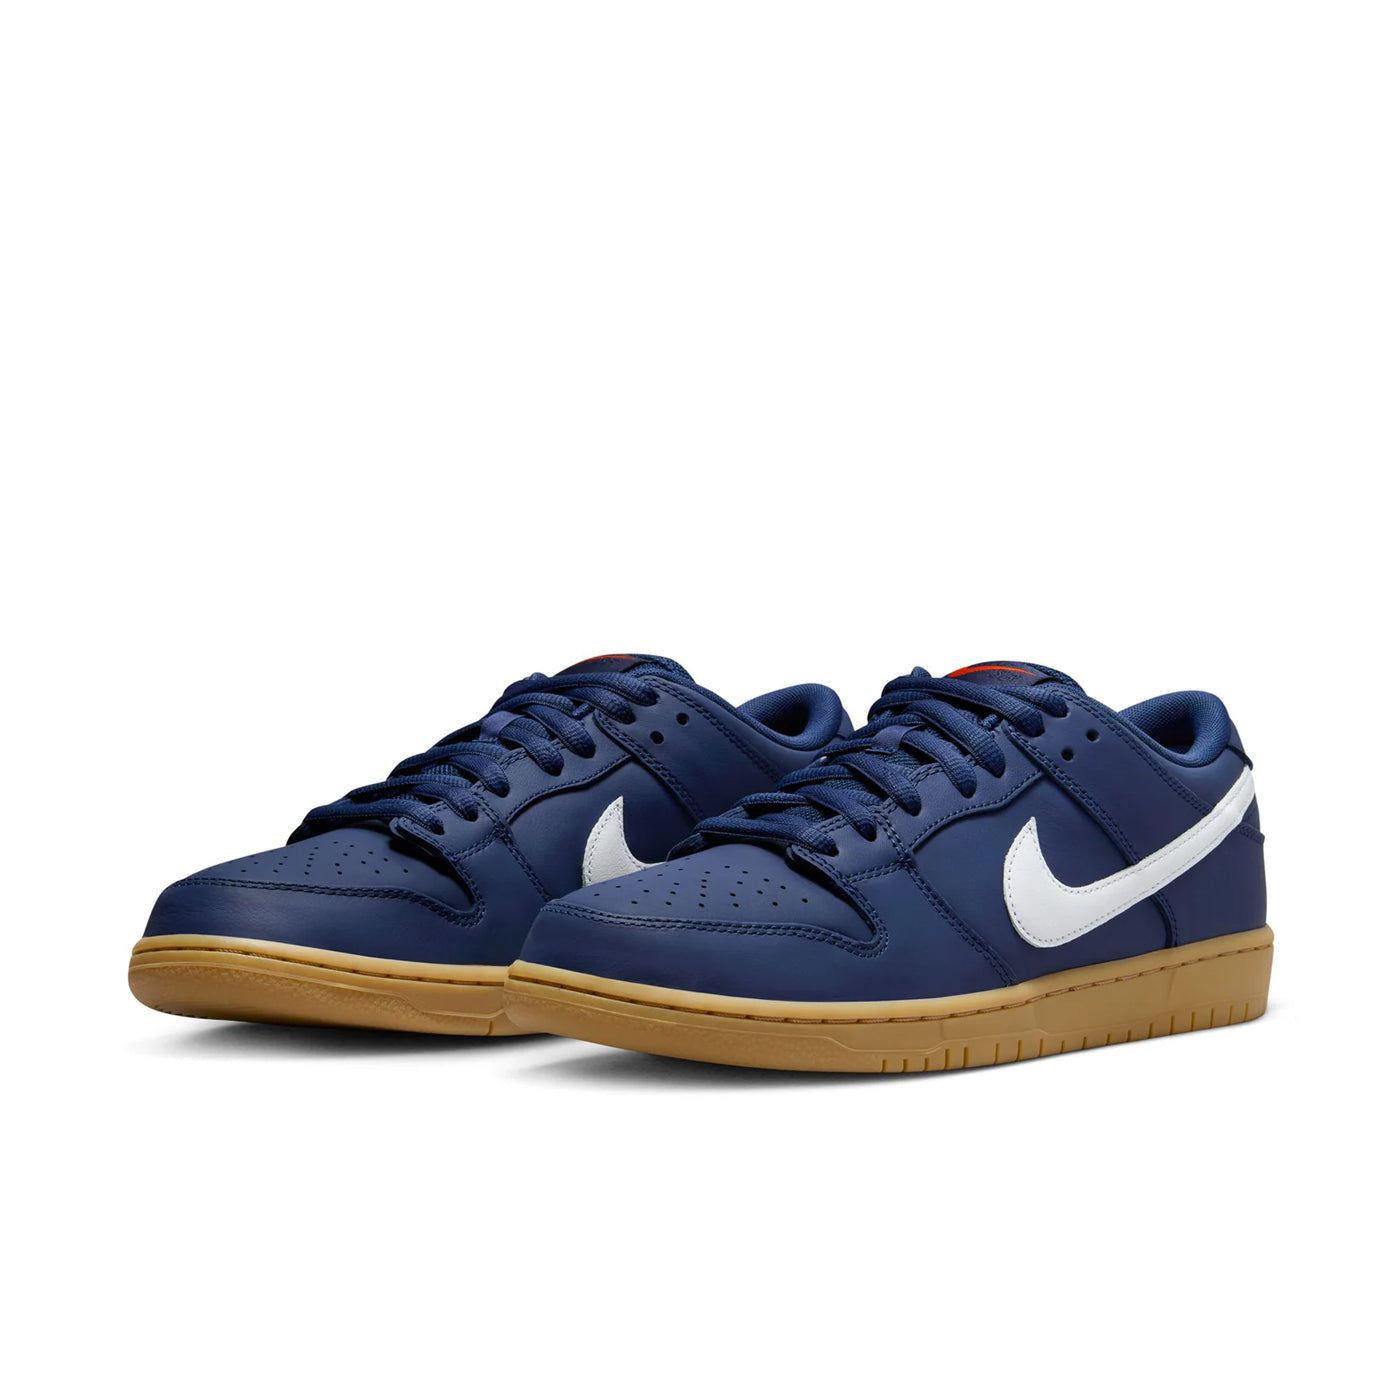 Nike SB ISO Dunk Low Shoes - Navy/White-Gum-Light Brown